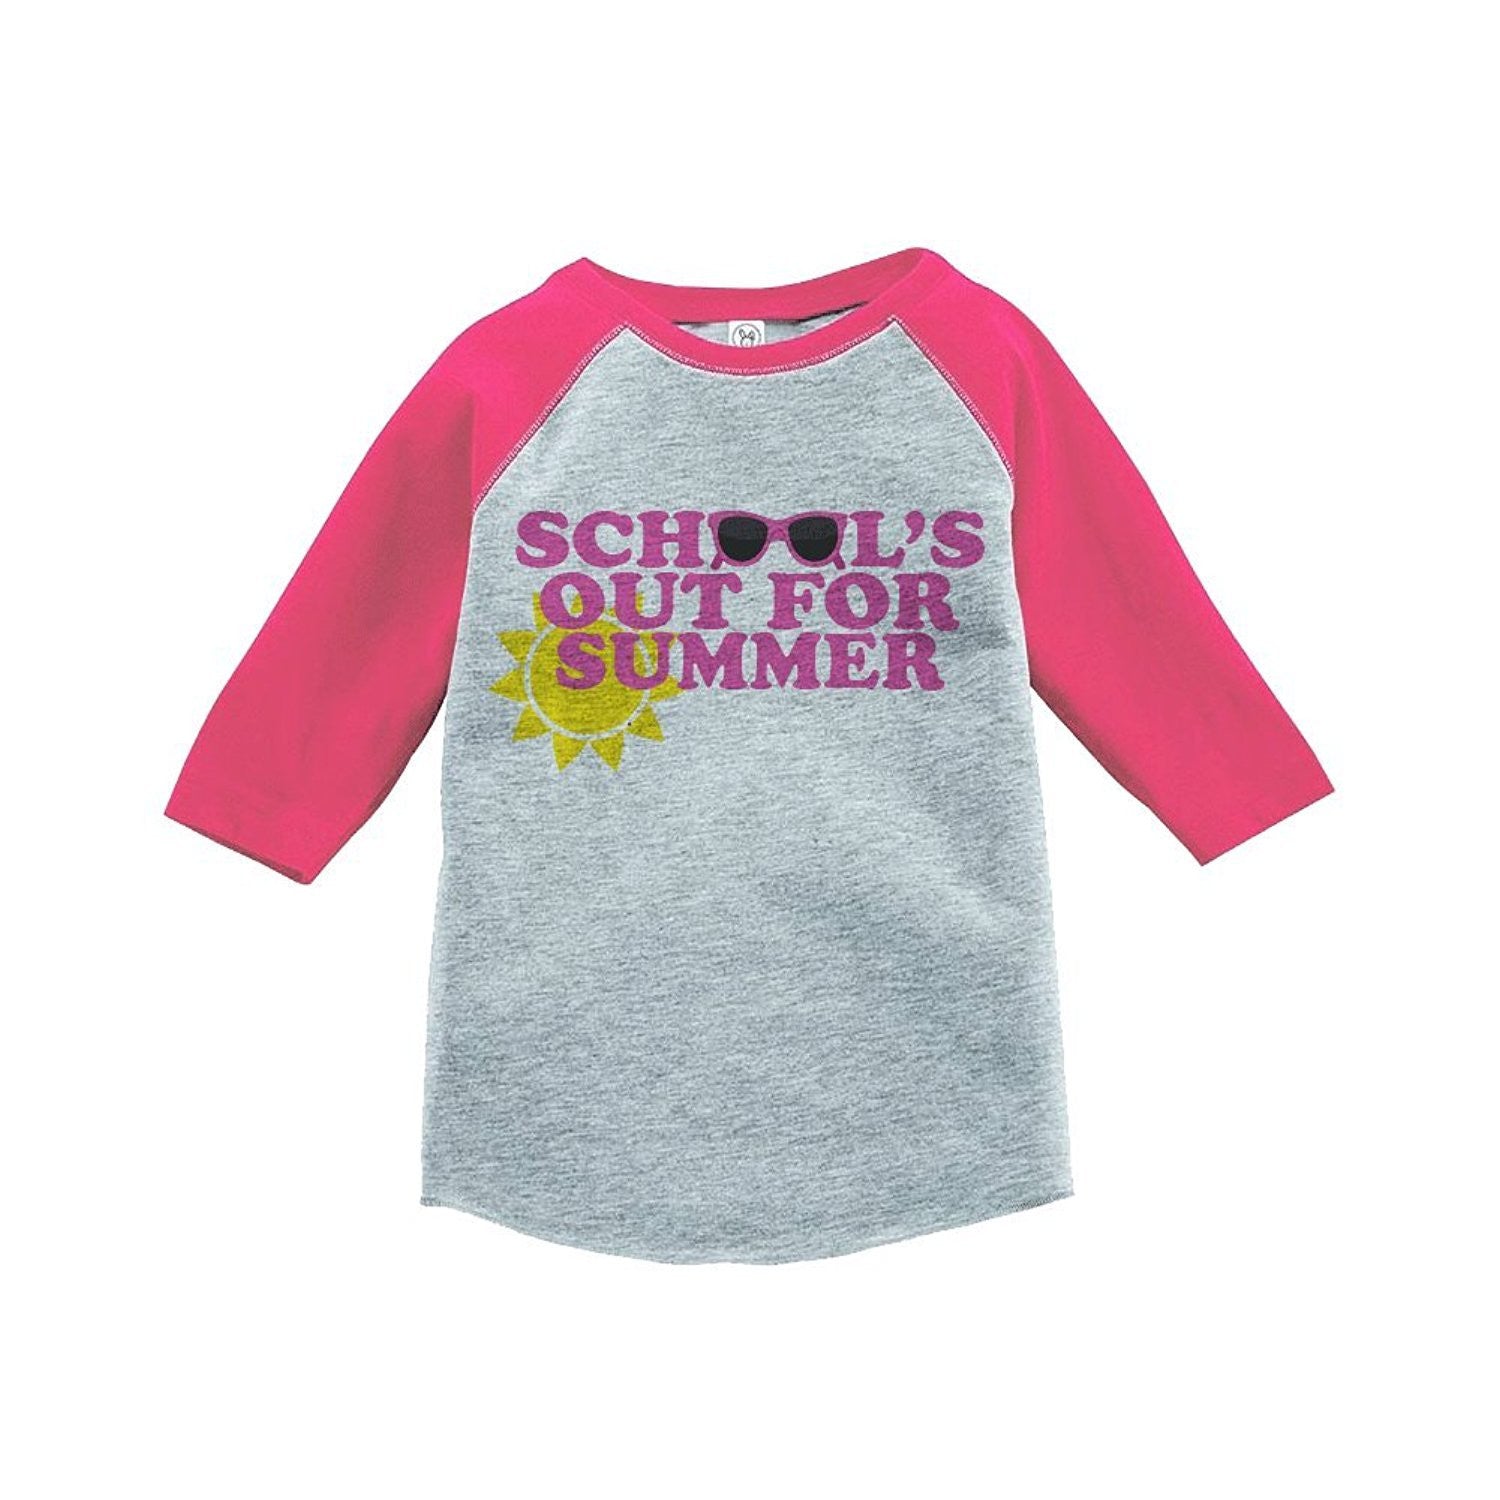 7 ate 9 Apparel Girls School's Out For Summer Raglan Tee